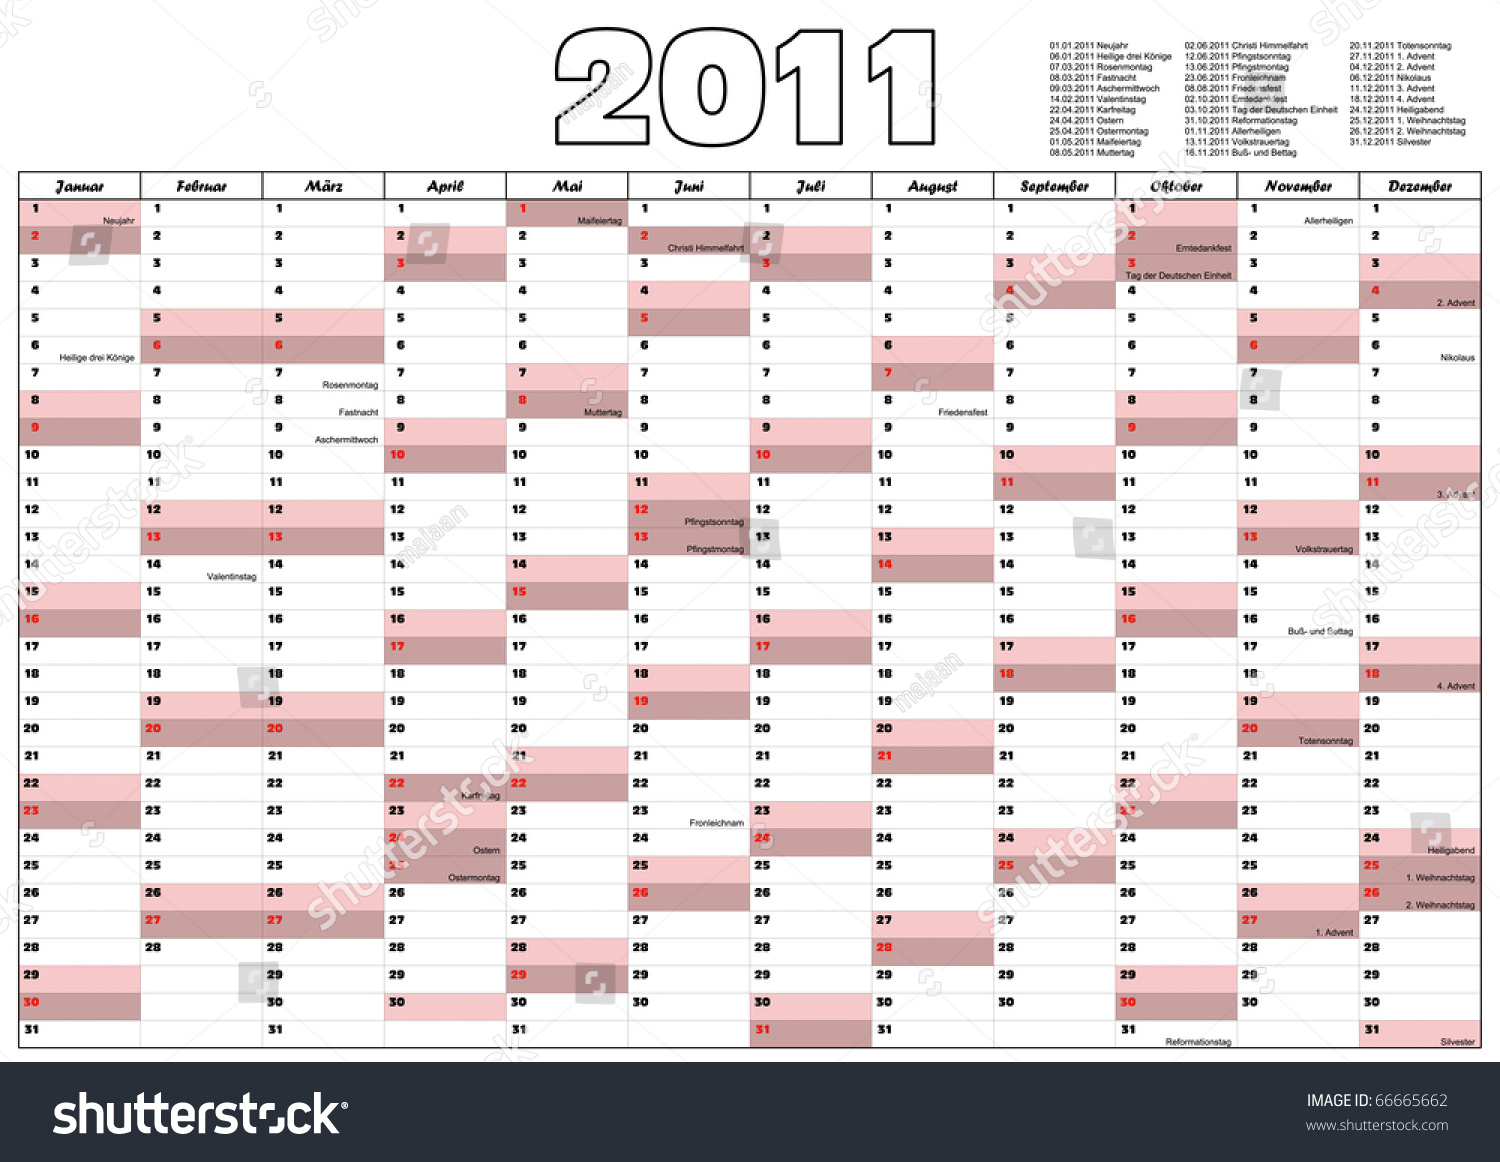 calendar-with-official-german-holidays-raster-version-also-available-stock-vector-illustration